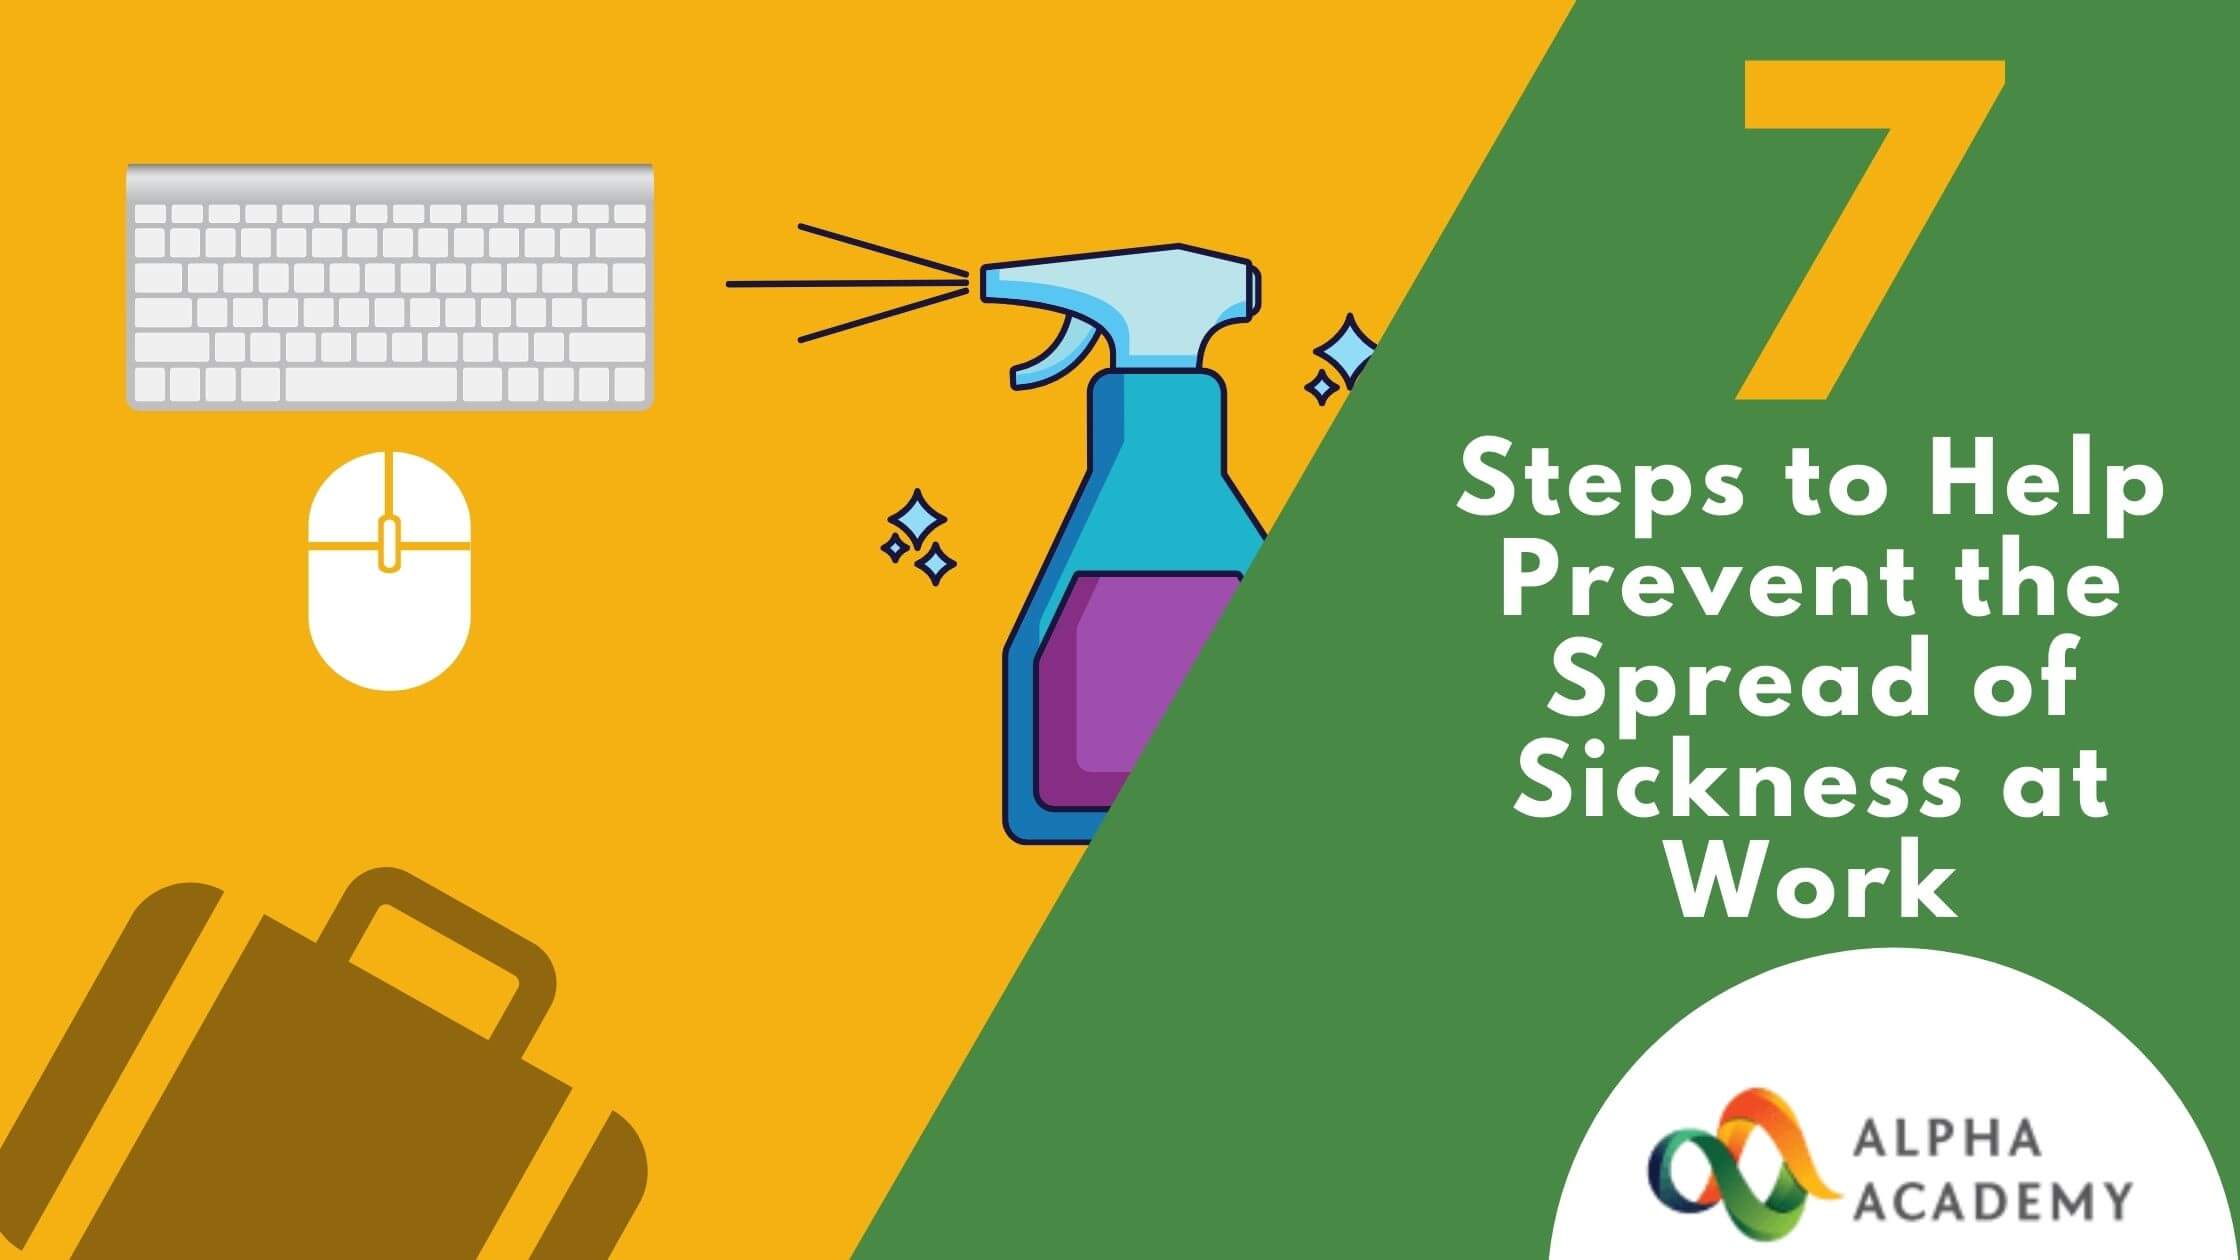 Preventive measures of spreading sickness at work